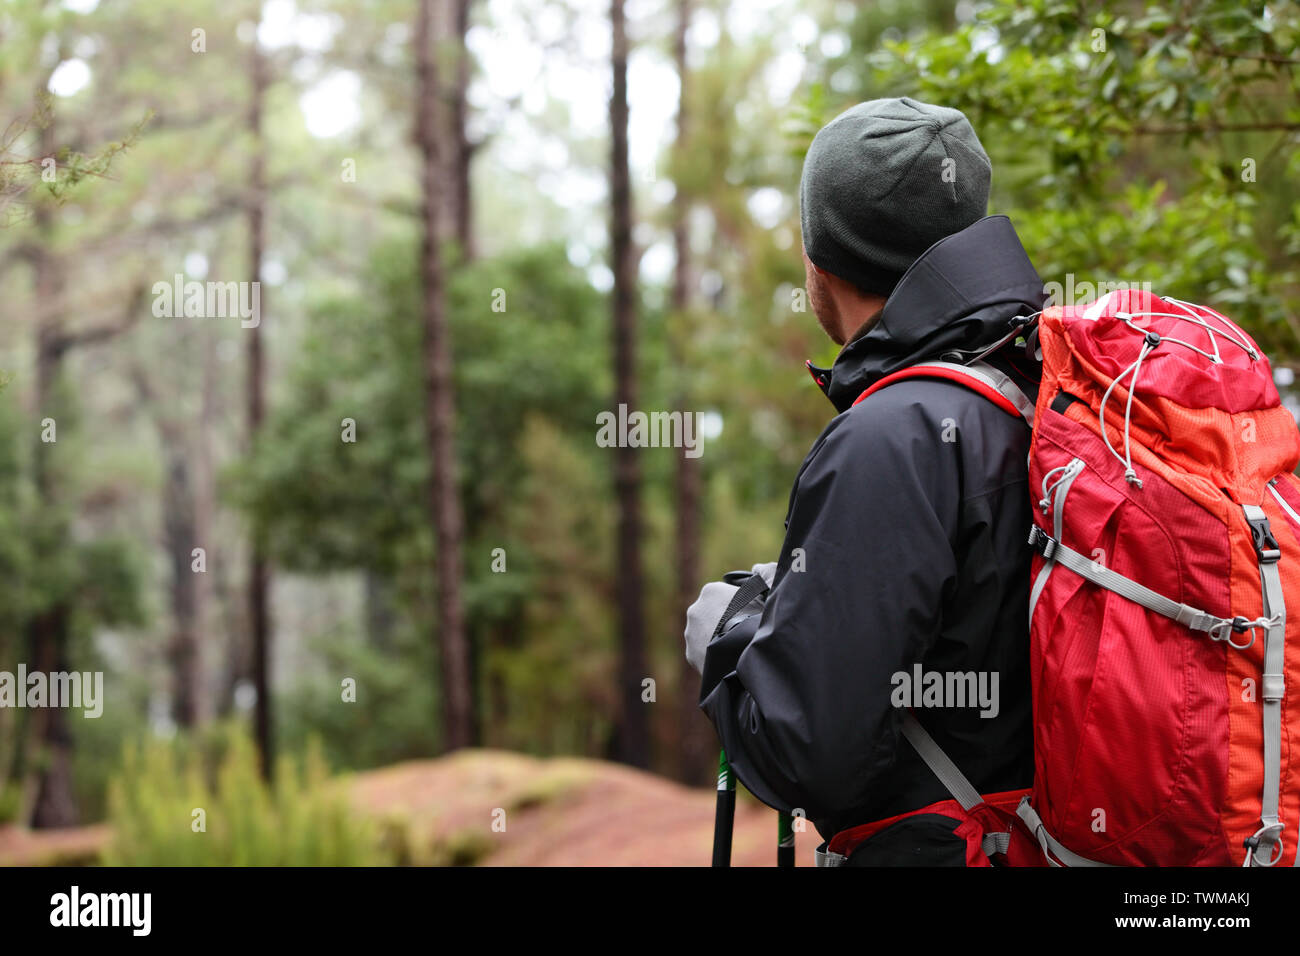 Hiker wearing hiking backpack and hardshell jacket on hike in forest. Man wearing hat gloves using hiking sticks poles outdoors in woods. Male hiker standing looking away. Stock Photo